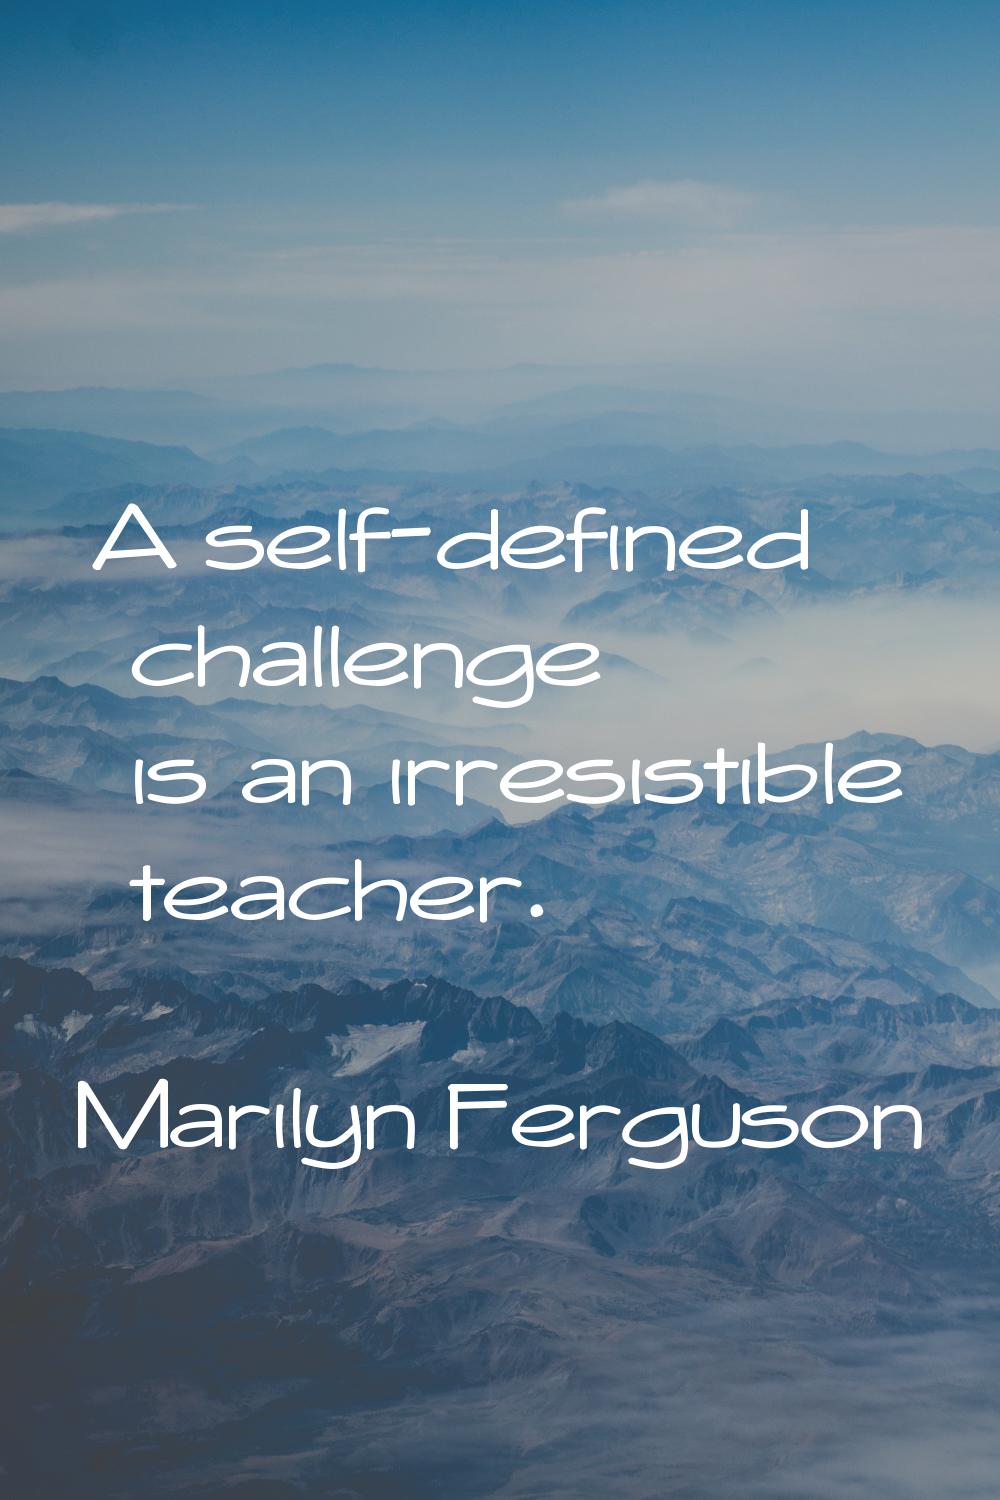 A self-defined challenge is an irresistible teacher.